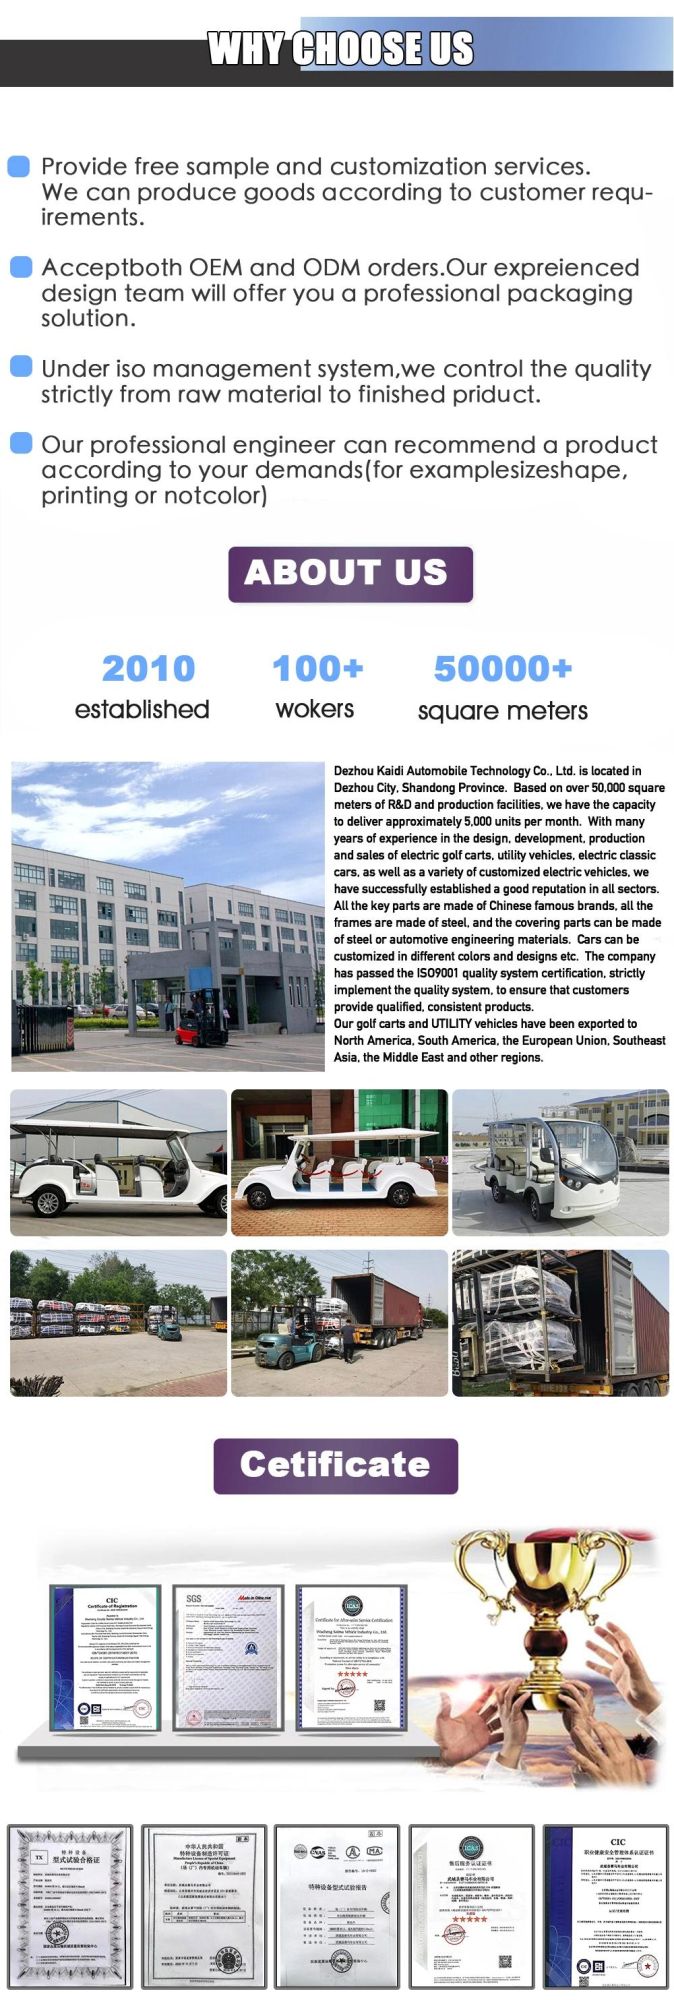 2022 Family Pedal Sightseeing Car for Funny Cycling Hotel Resort Rent 4 Wheel Seater Tour Bicycle with CE Certification